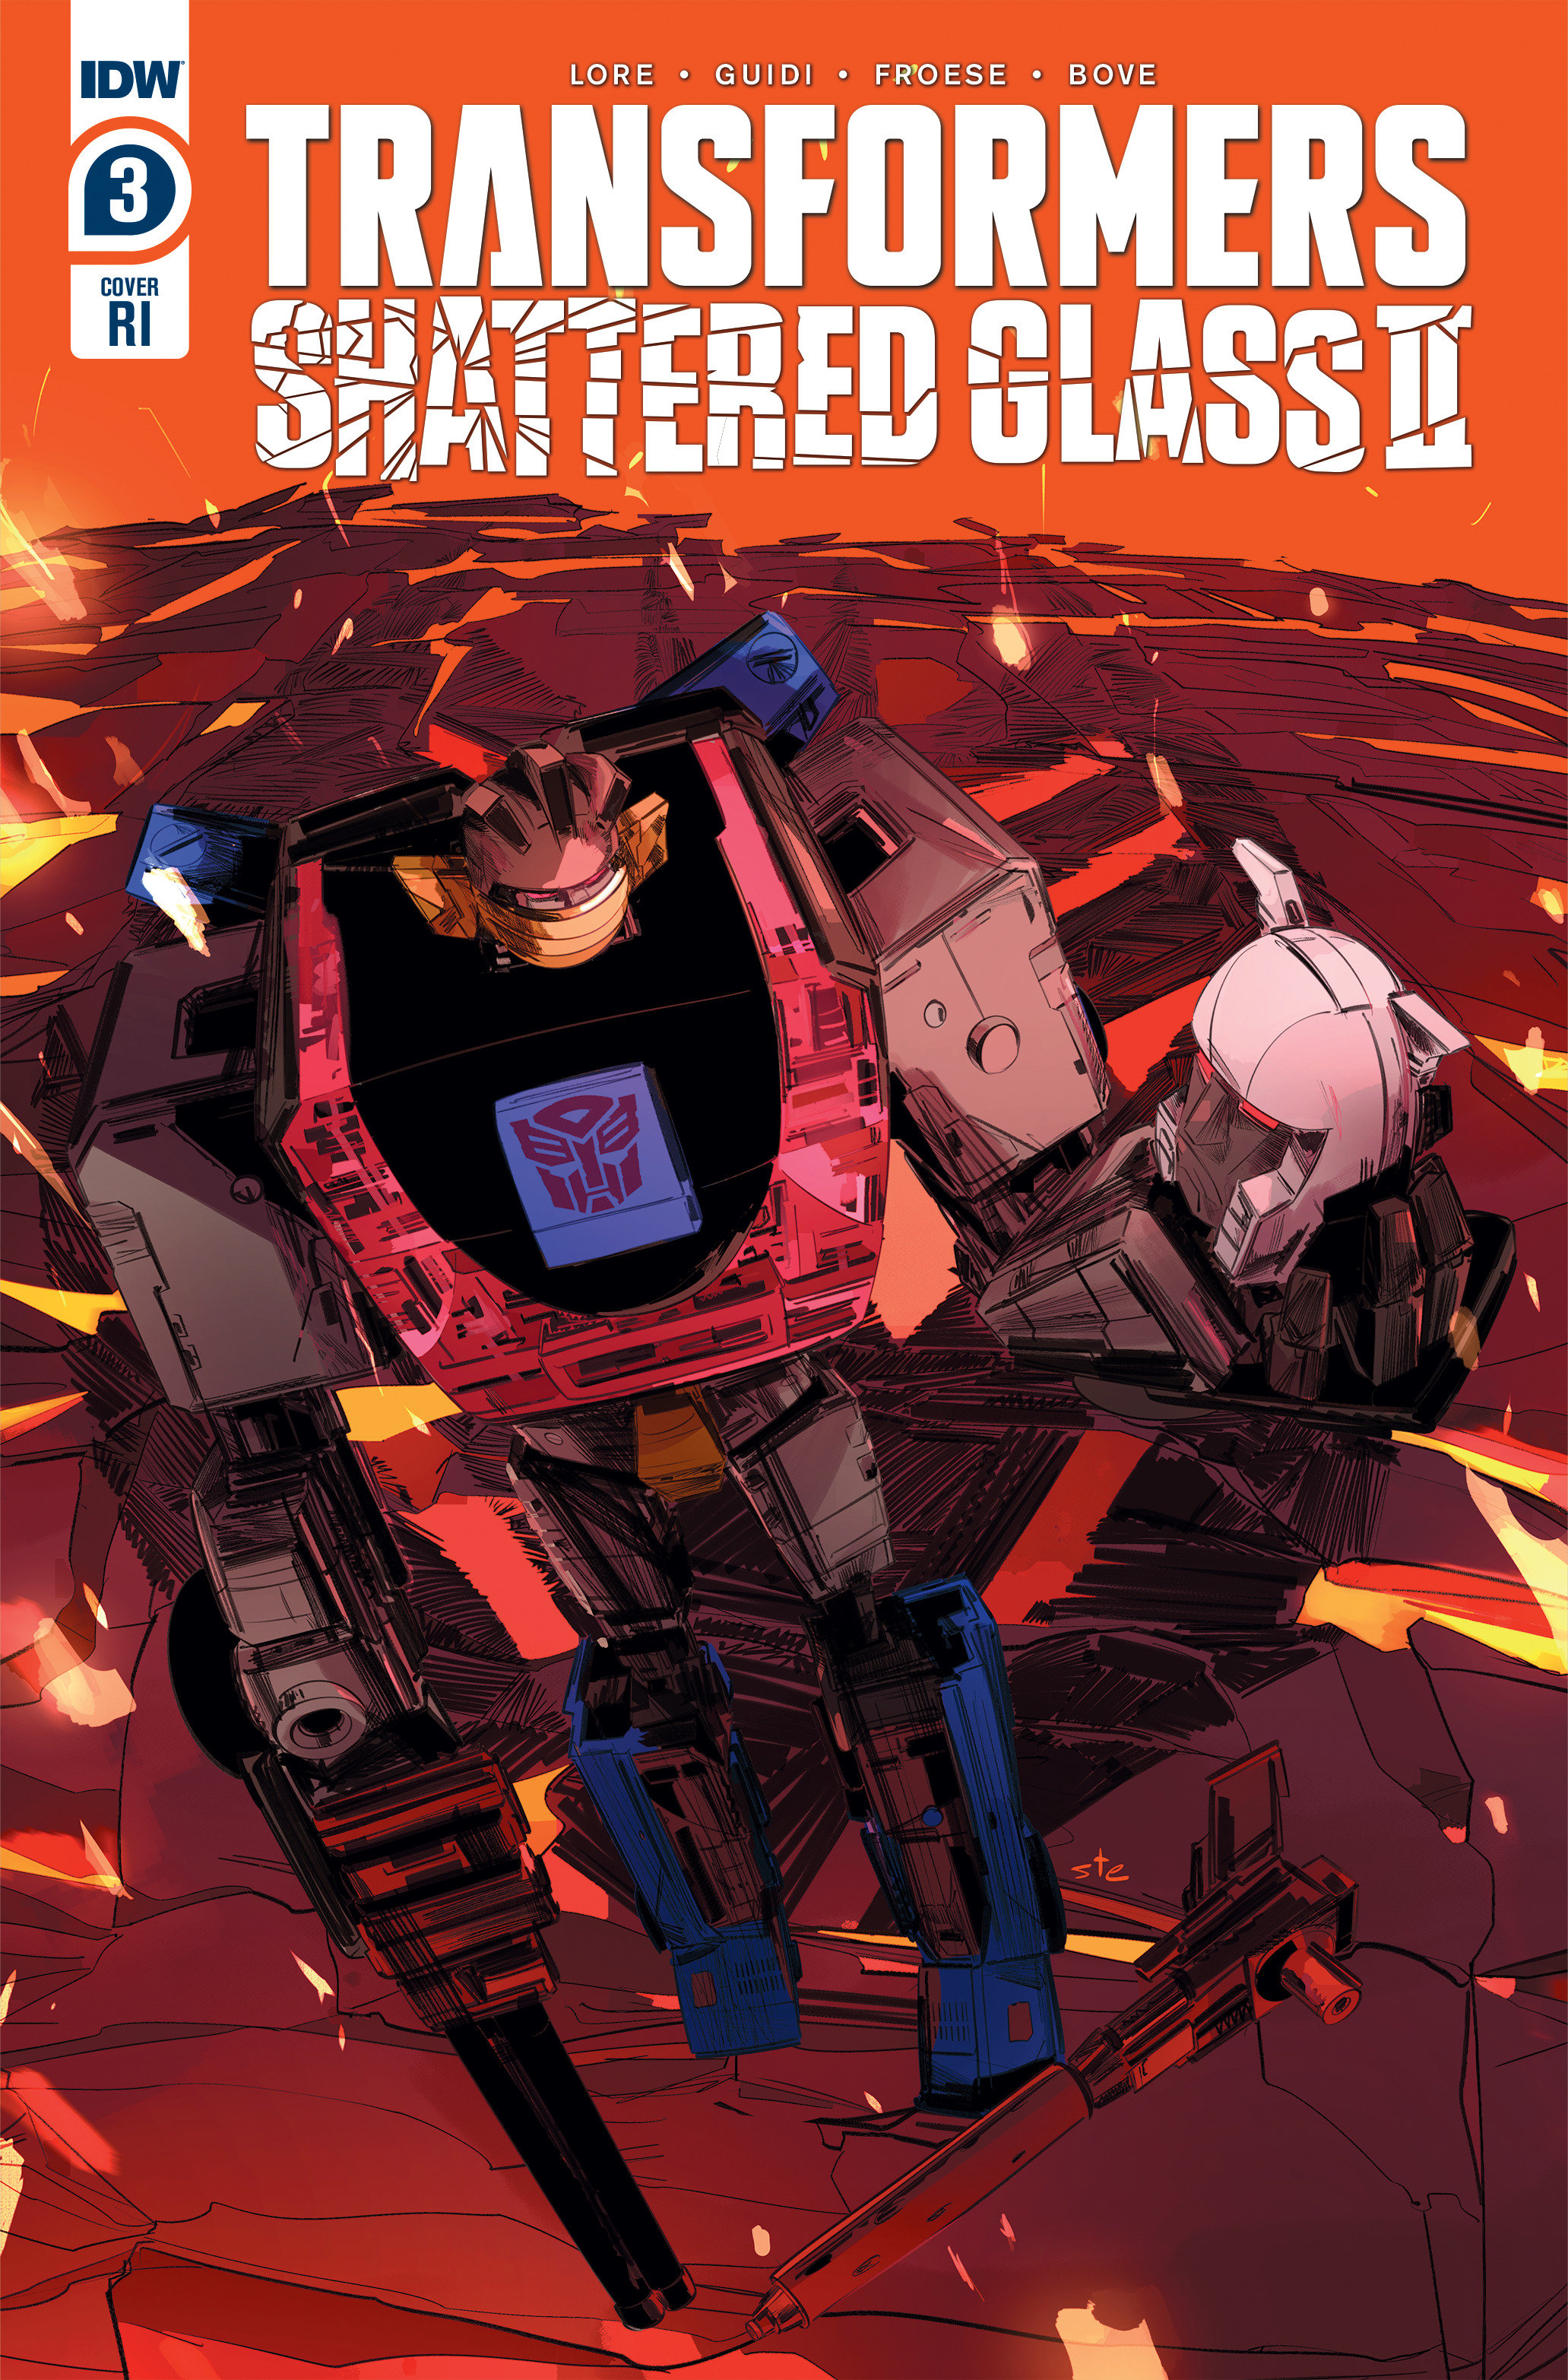 Transformers Shattered Glass II #3 Cover C 1 for 10 Incentive Simeone